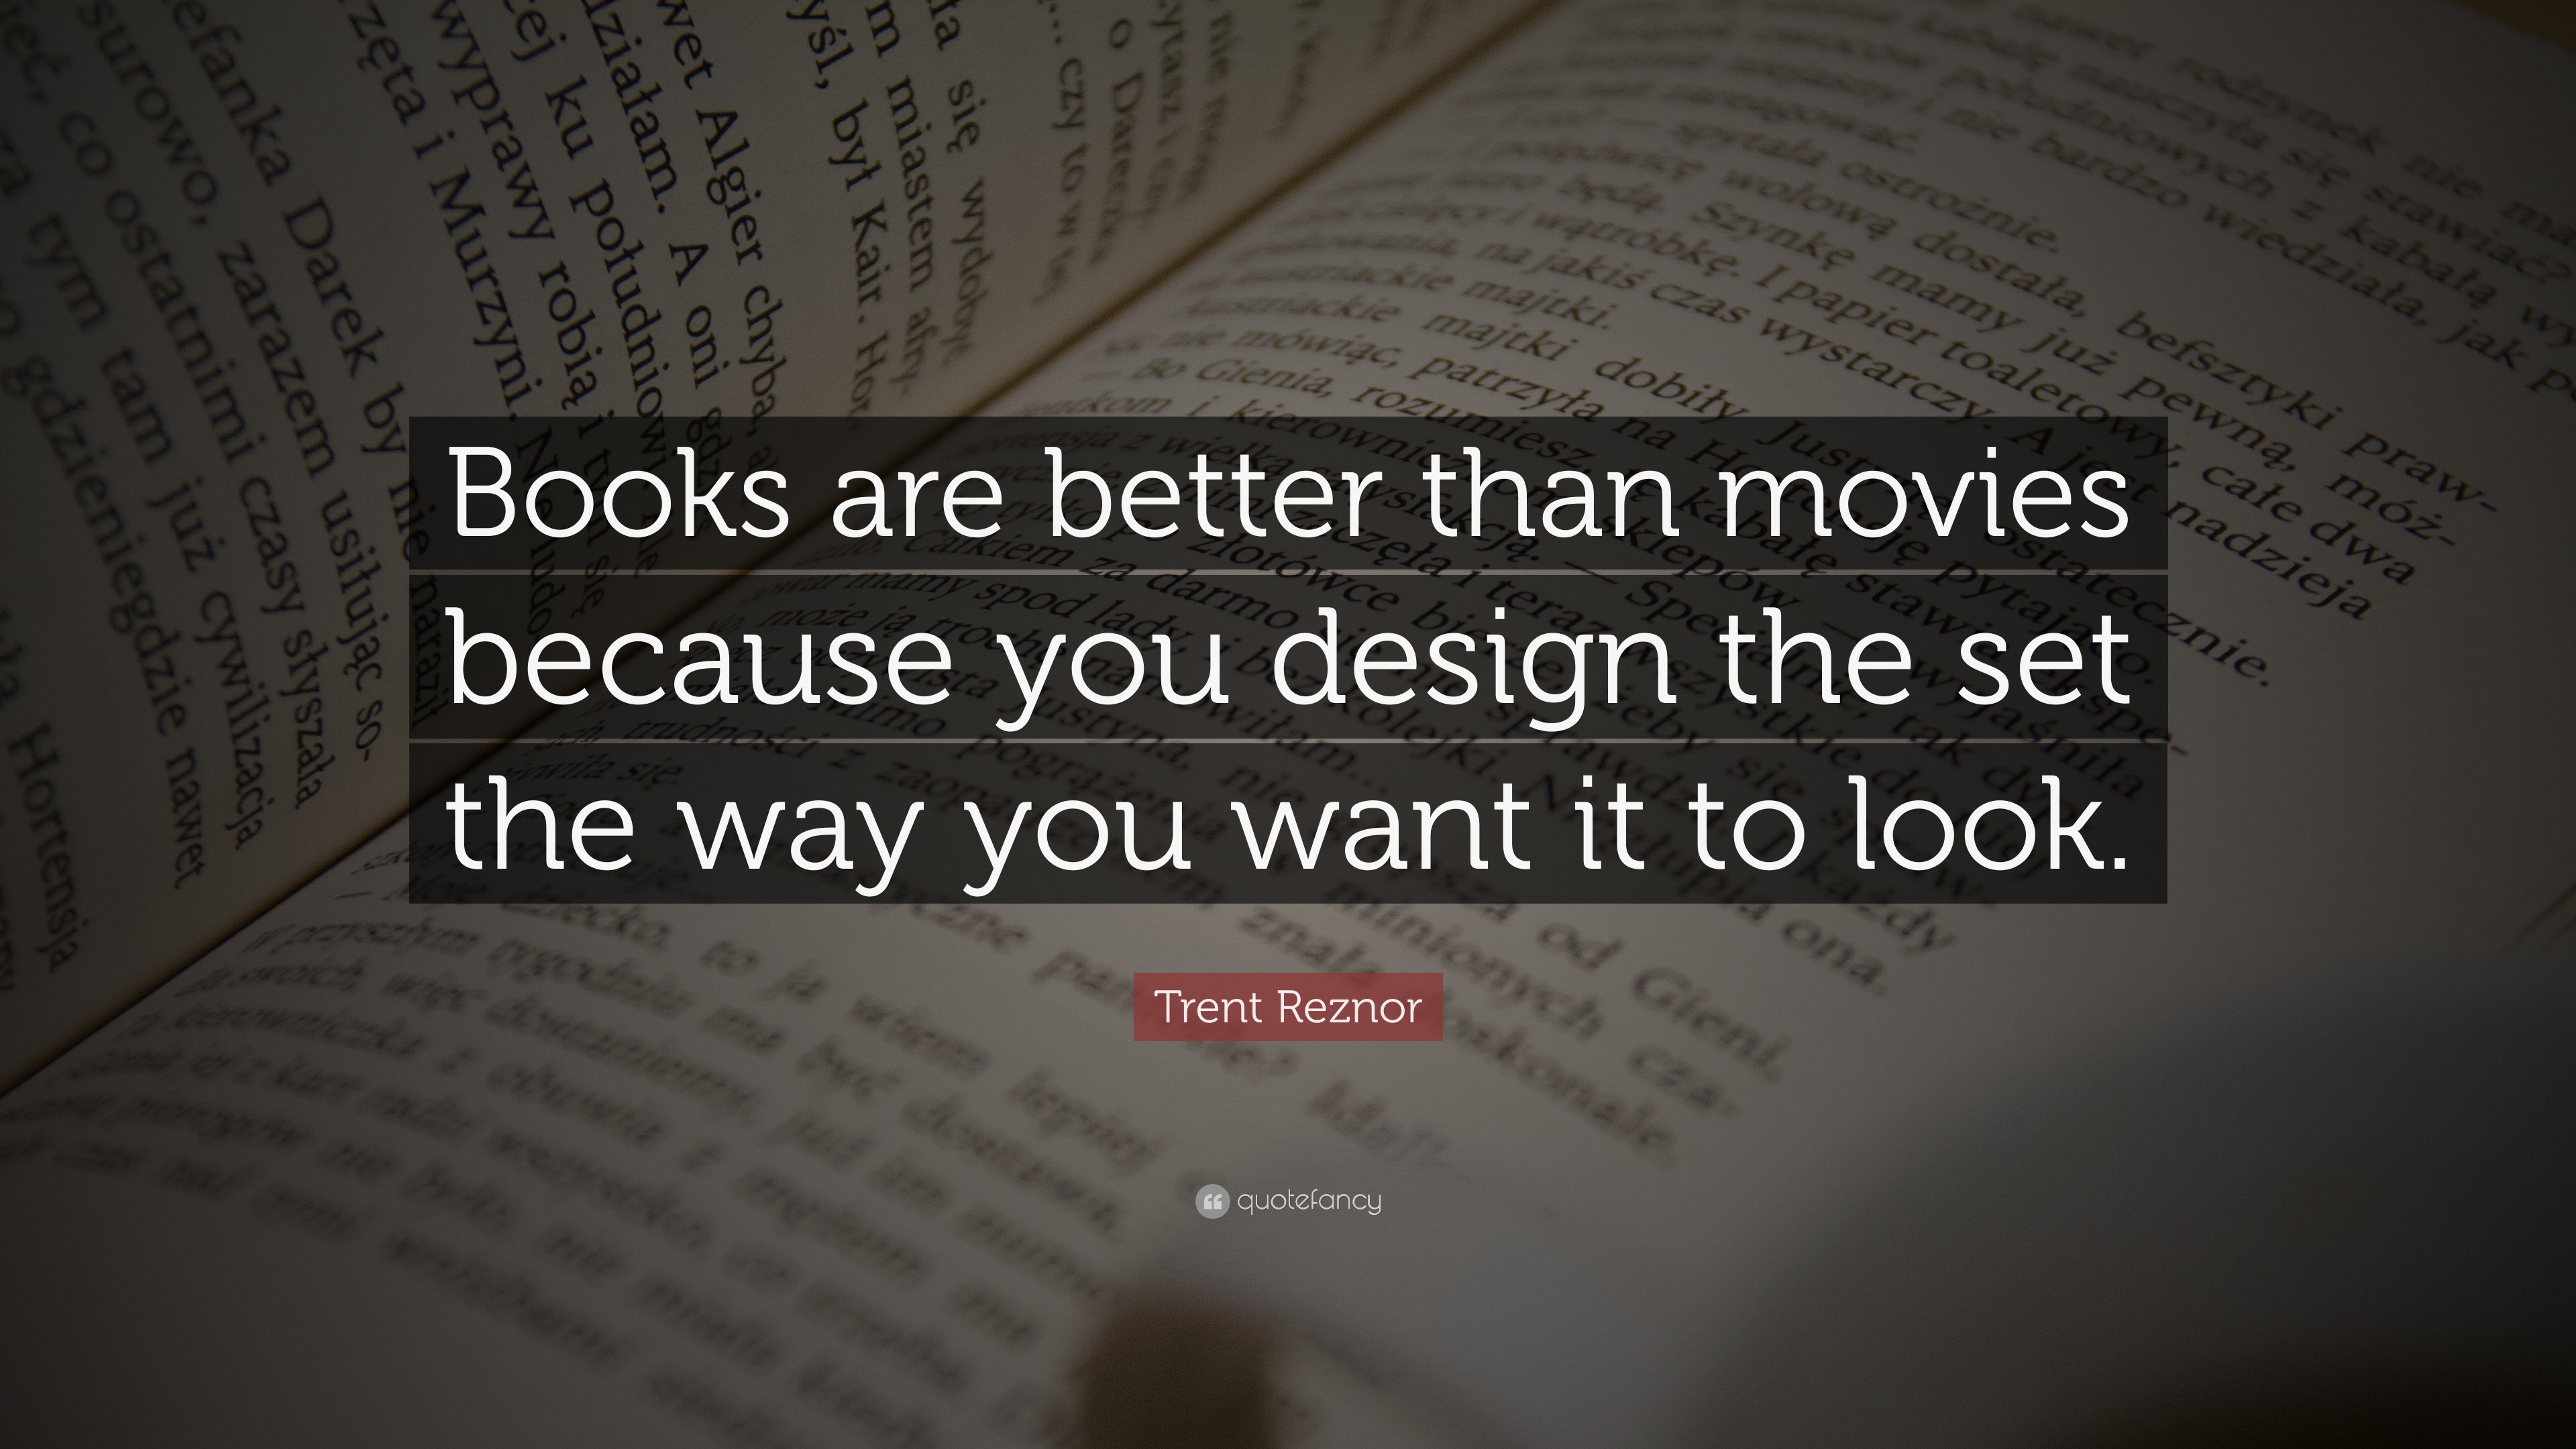 Why books are better than movies